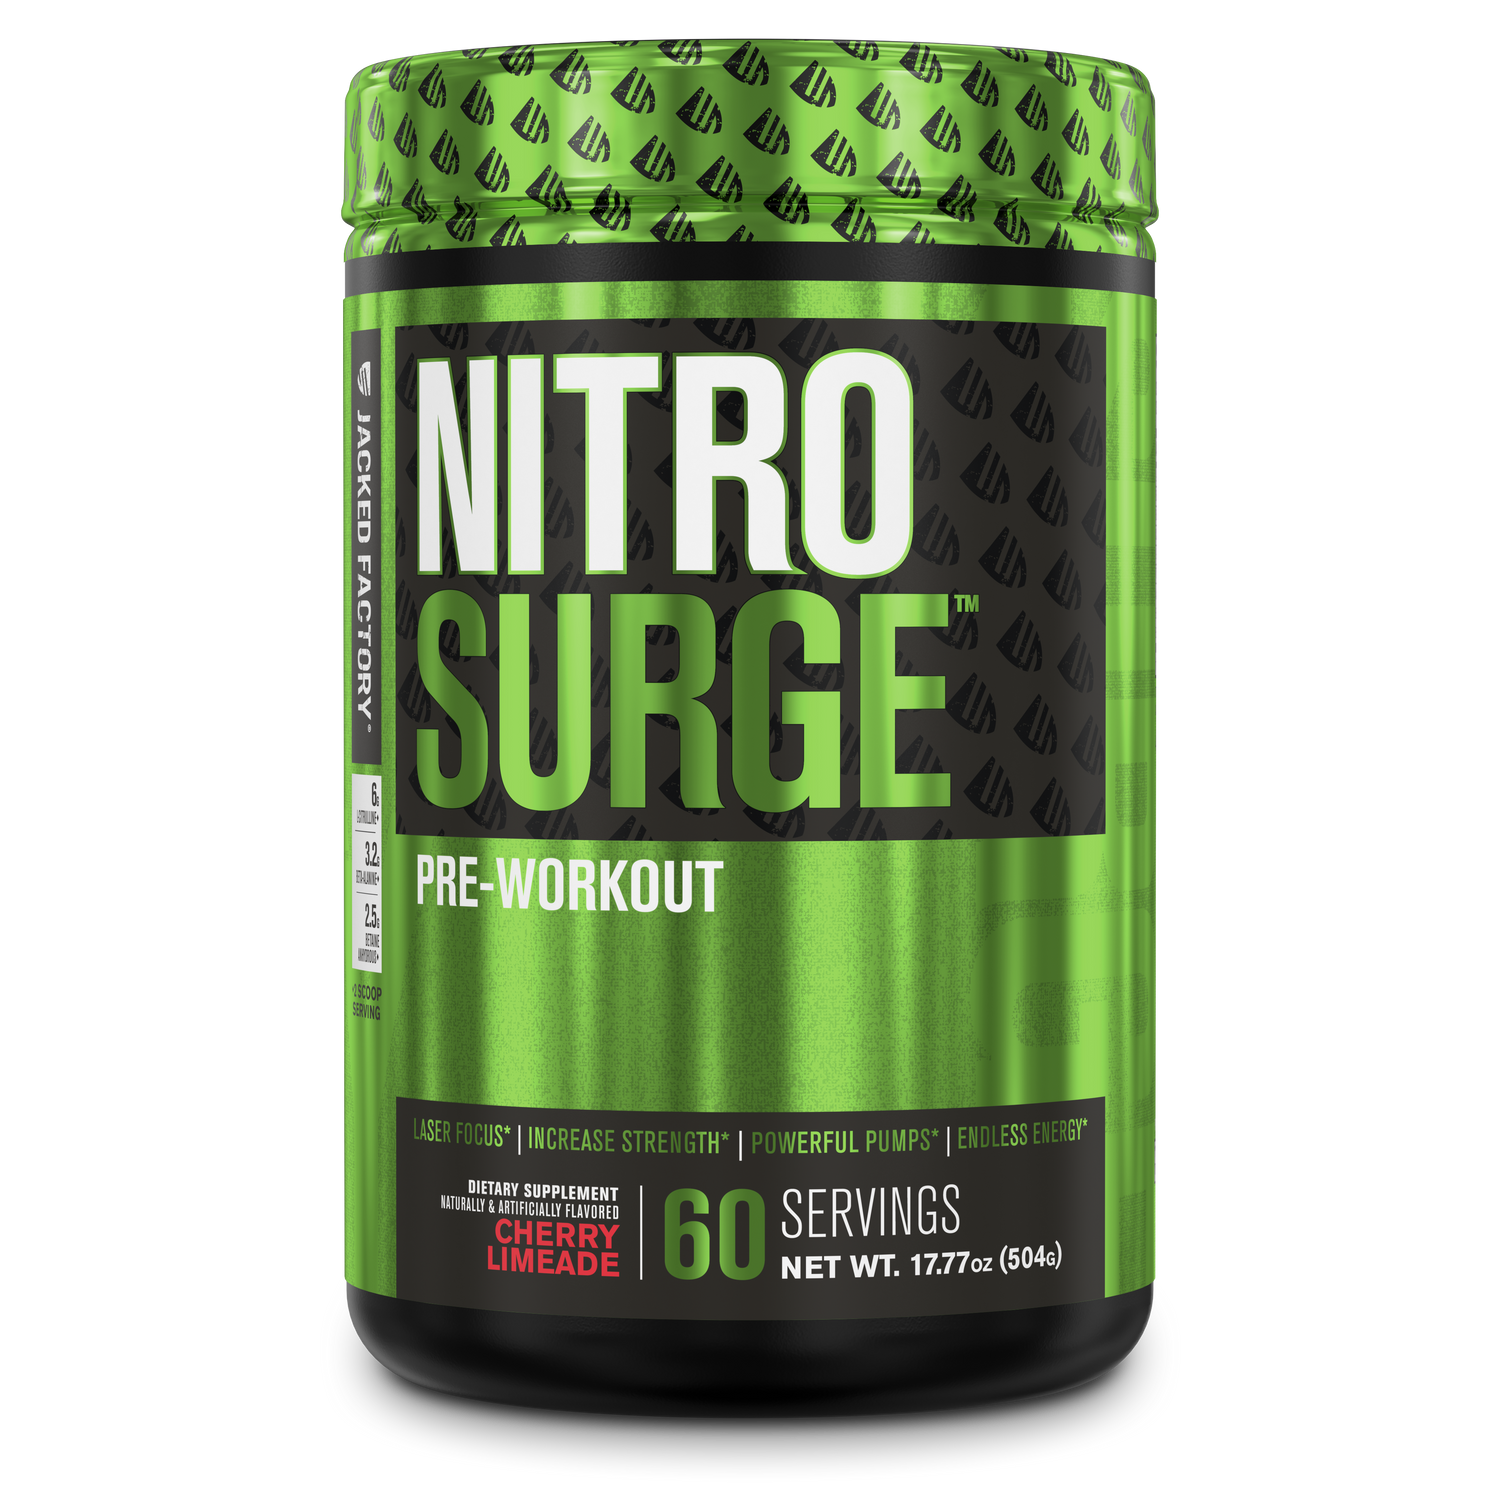 Jacked Factory's Cherry Limeade Nitrosurge (60 servings) in a black bottle with green label